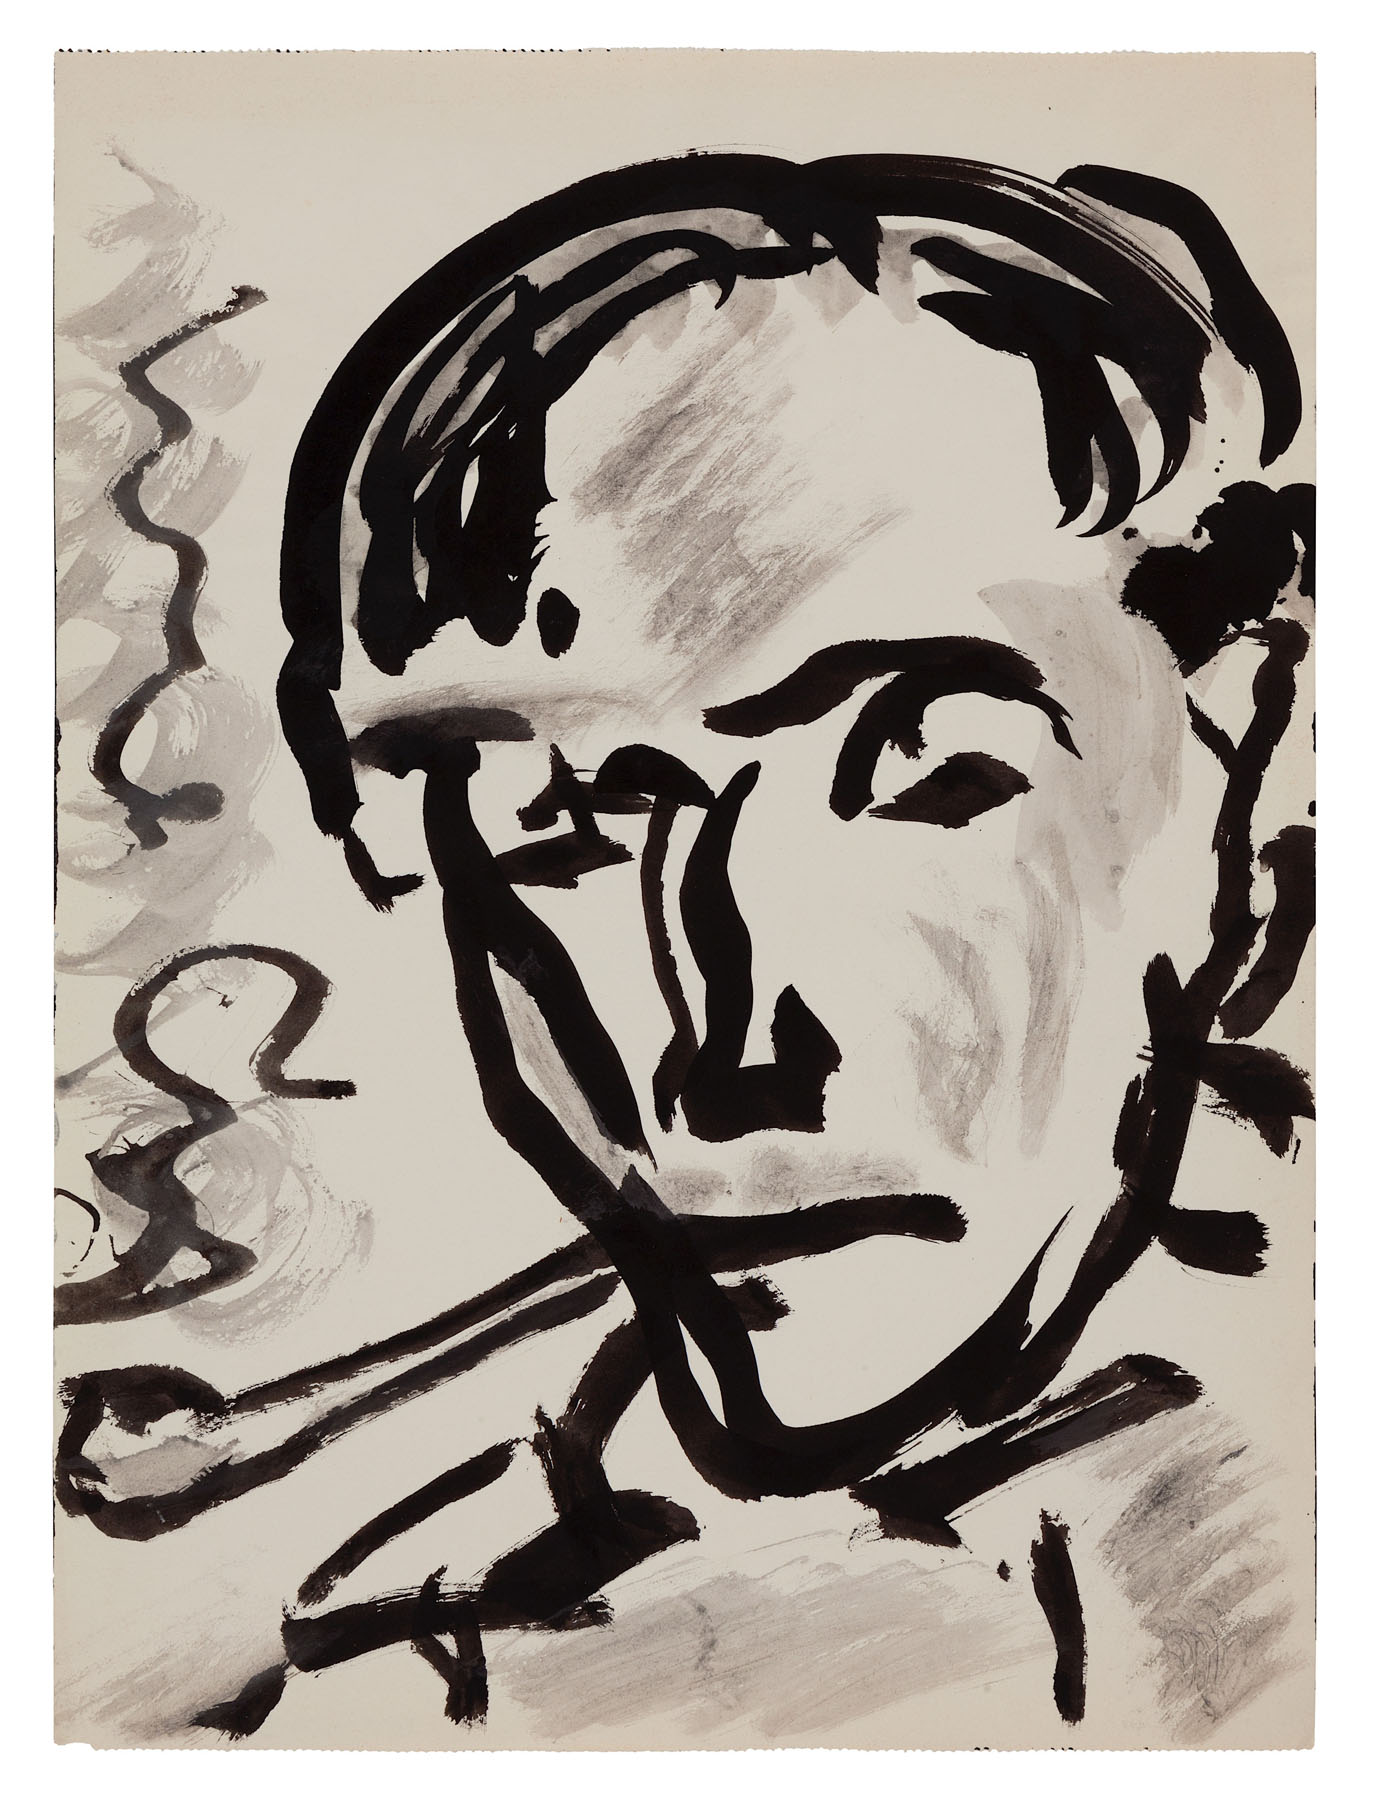 Portrait Max Pechstein, c. 1953. Black ink on paper, 15.7 x 11.6 in. (40 x 29.5 cm). Private collection. Photo Malcolm Varon ©Bianca Stock